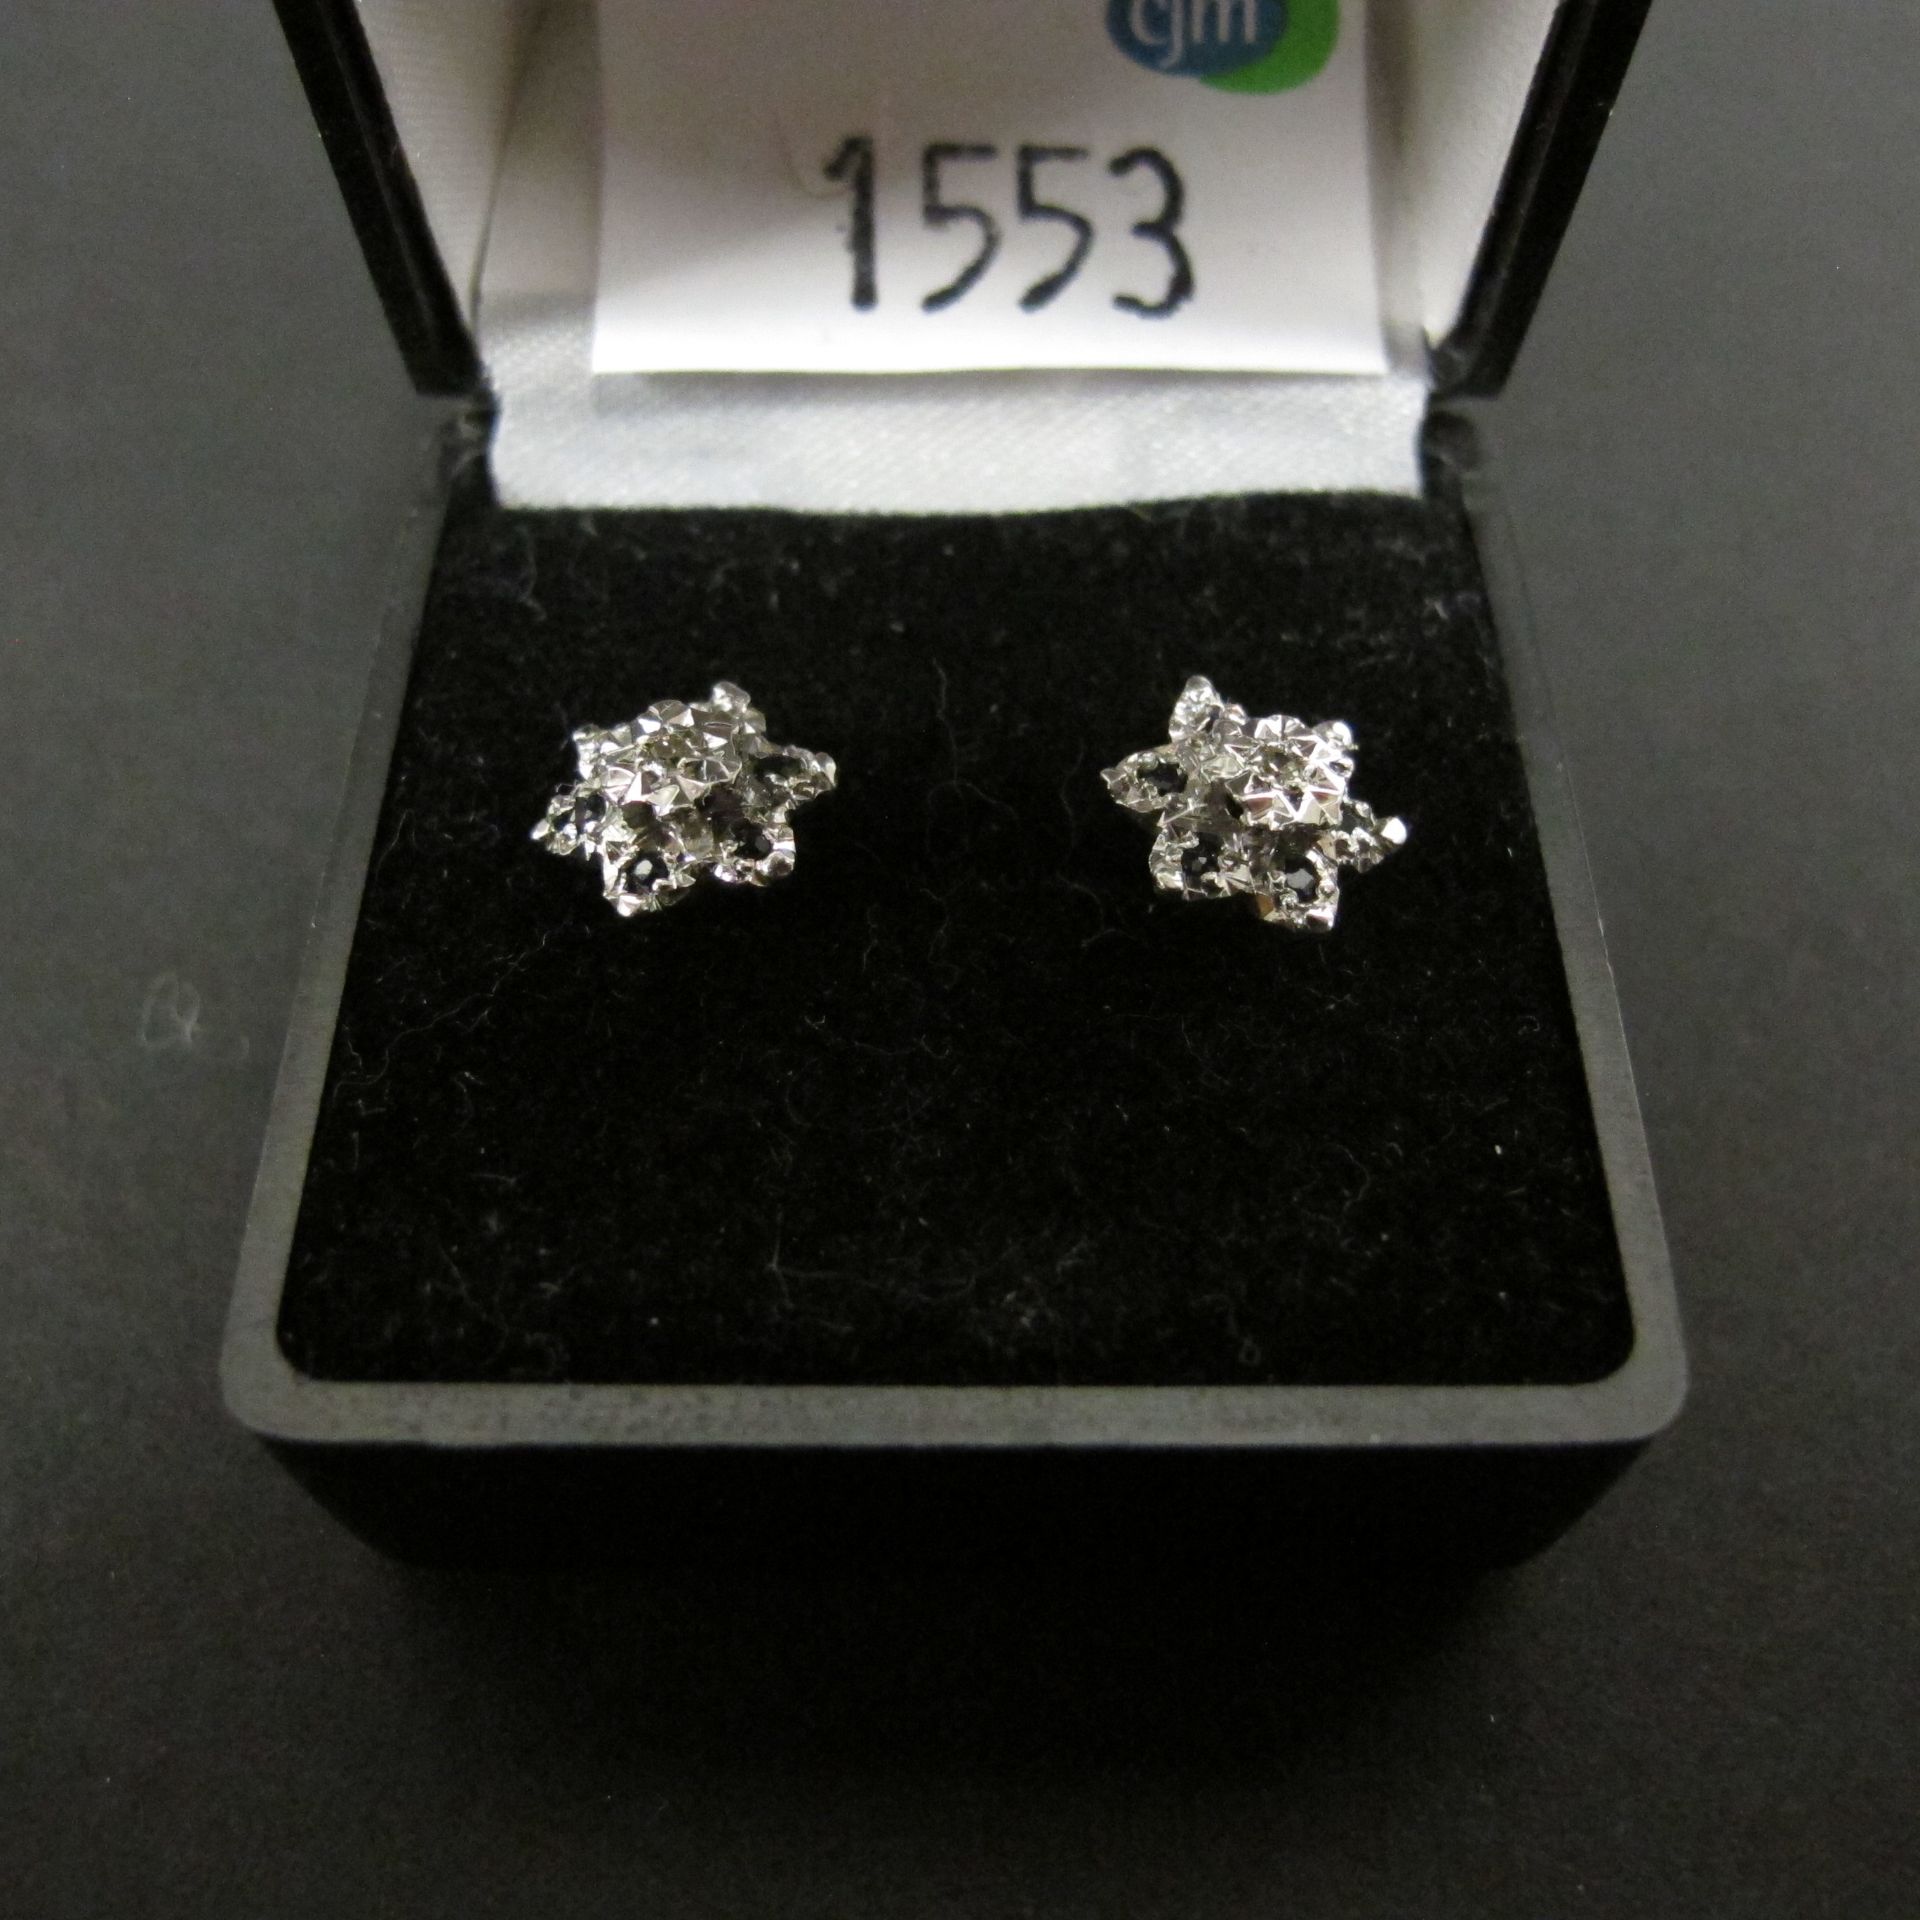 Pair of 9ct gold, diamond and sapphire stud earrings (est £30-£60)